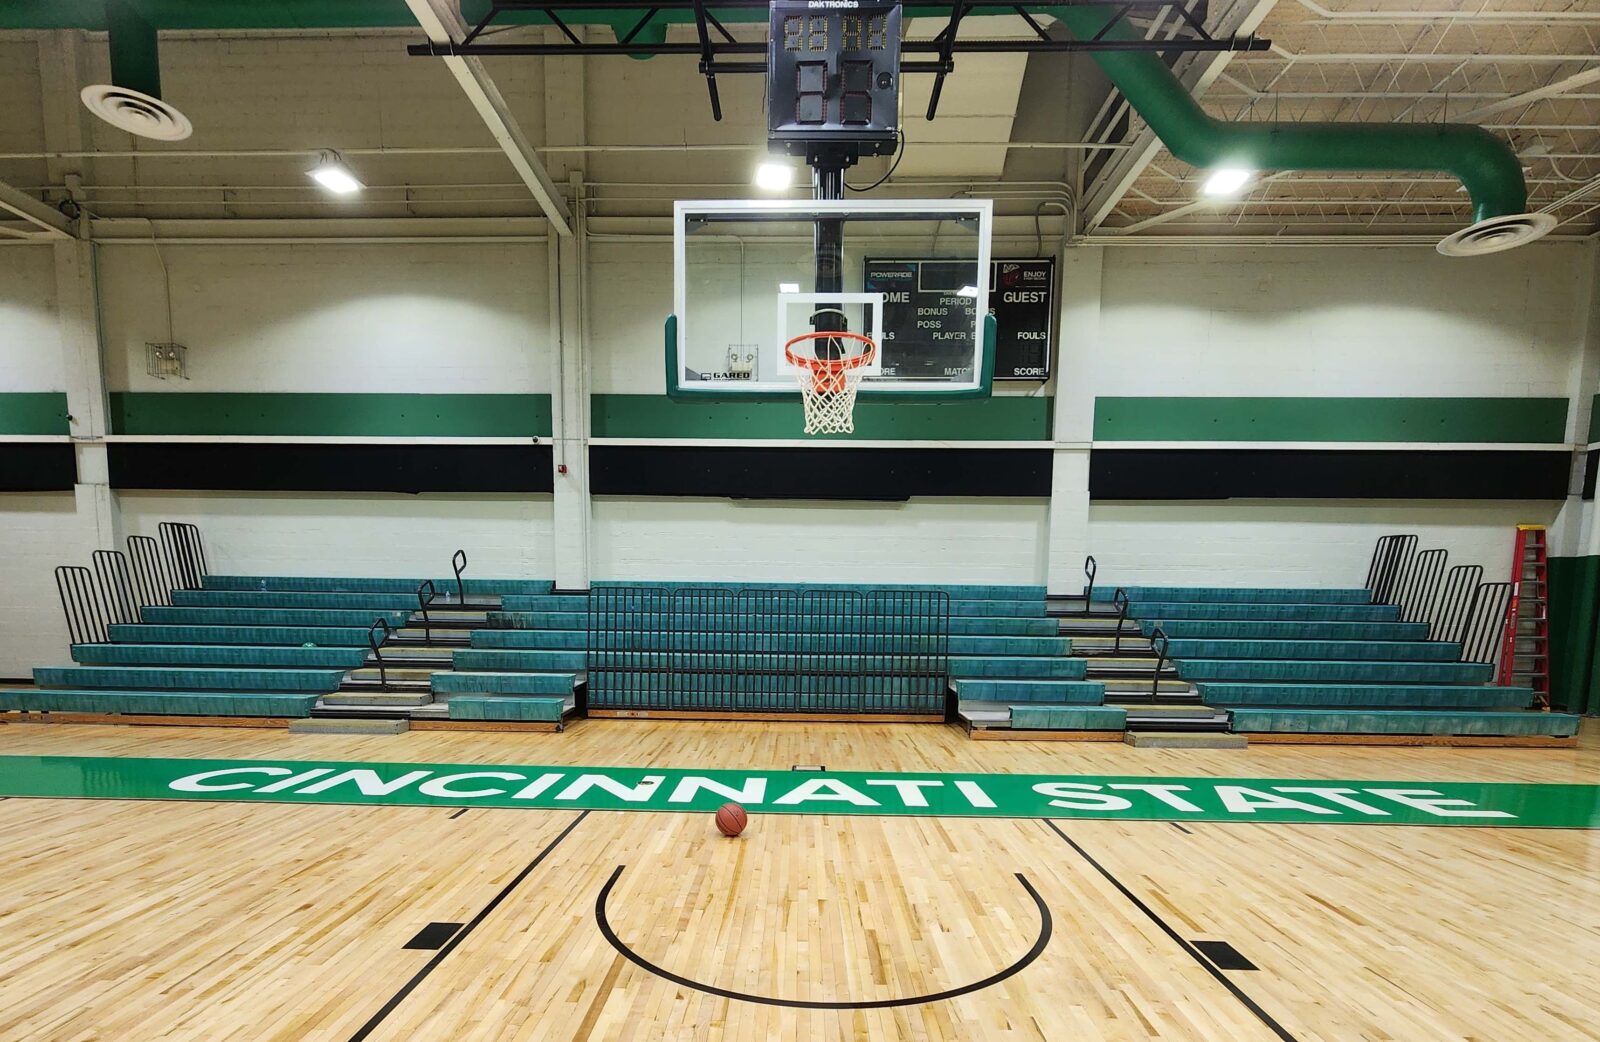 Cincinnati State refinished basketball court, seen from the foul line